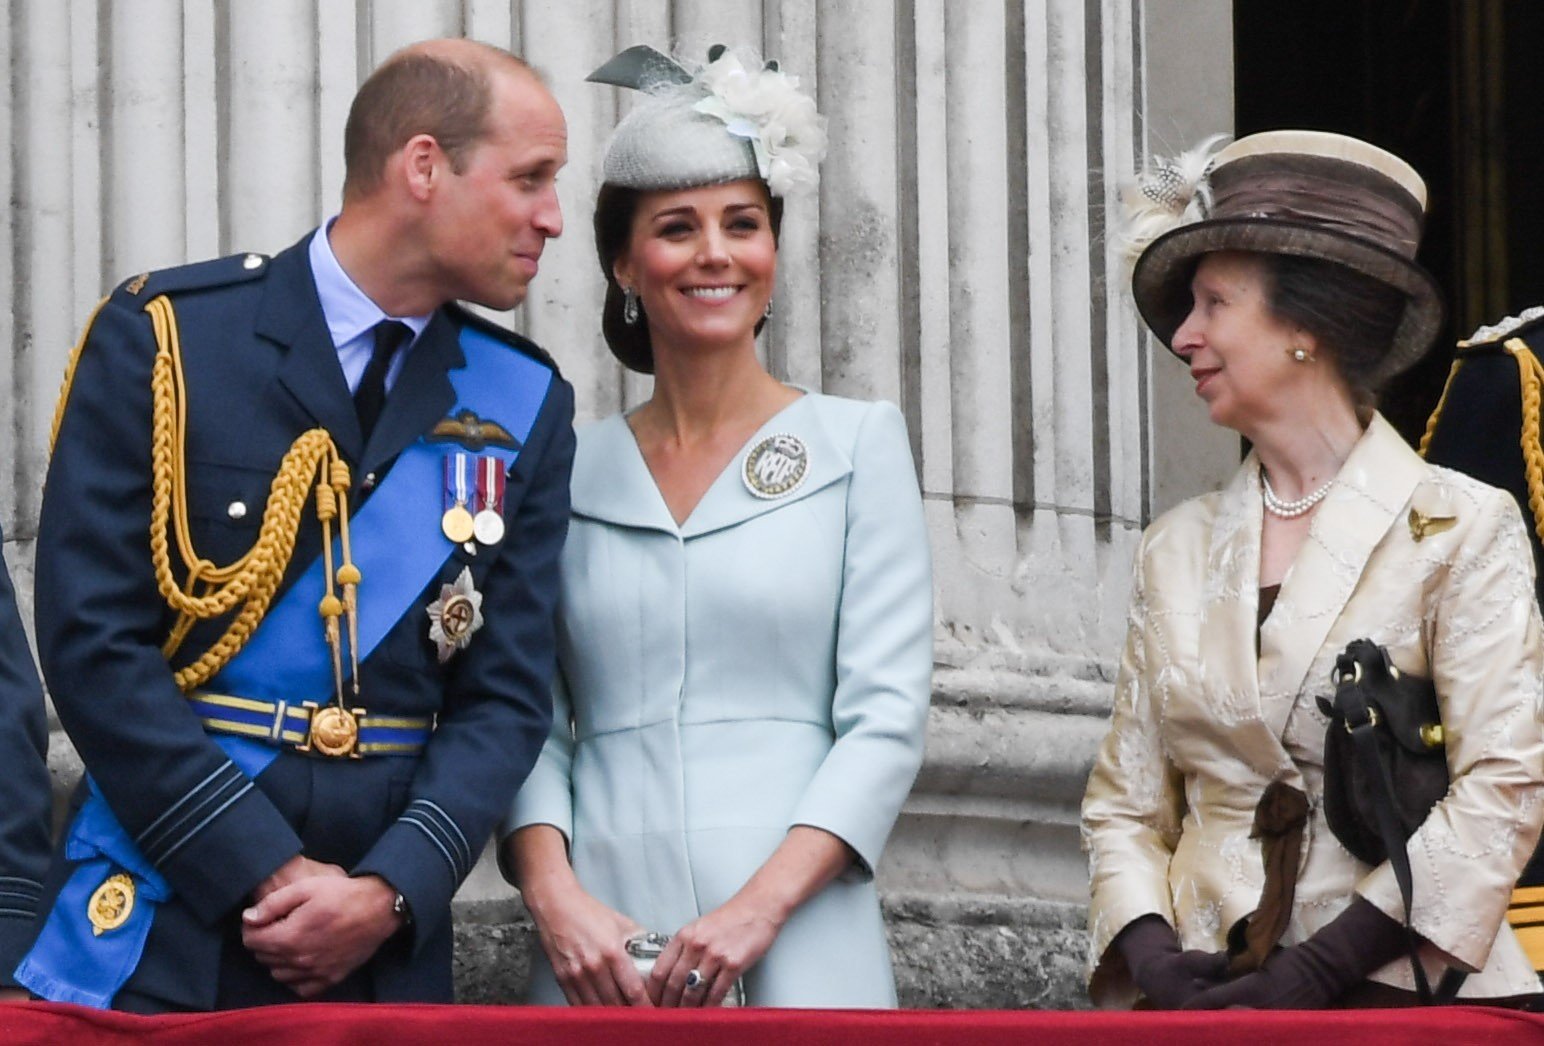 Prince William, Kate Middleton, and Princess Anne standing on the balcony of Buckingham Palace